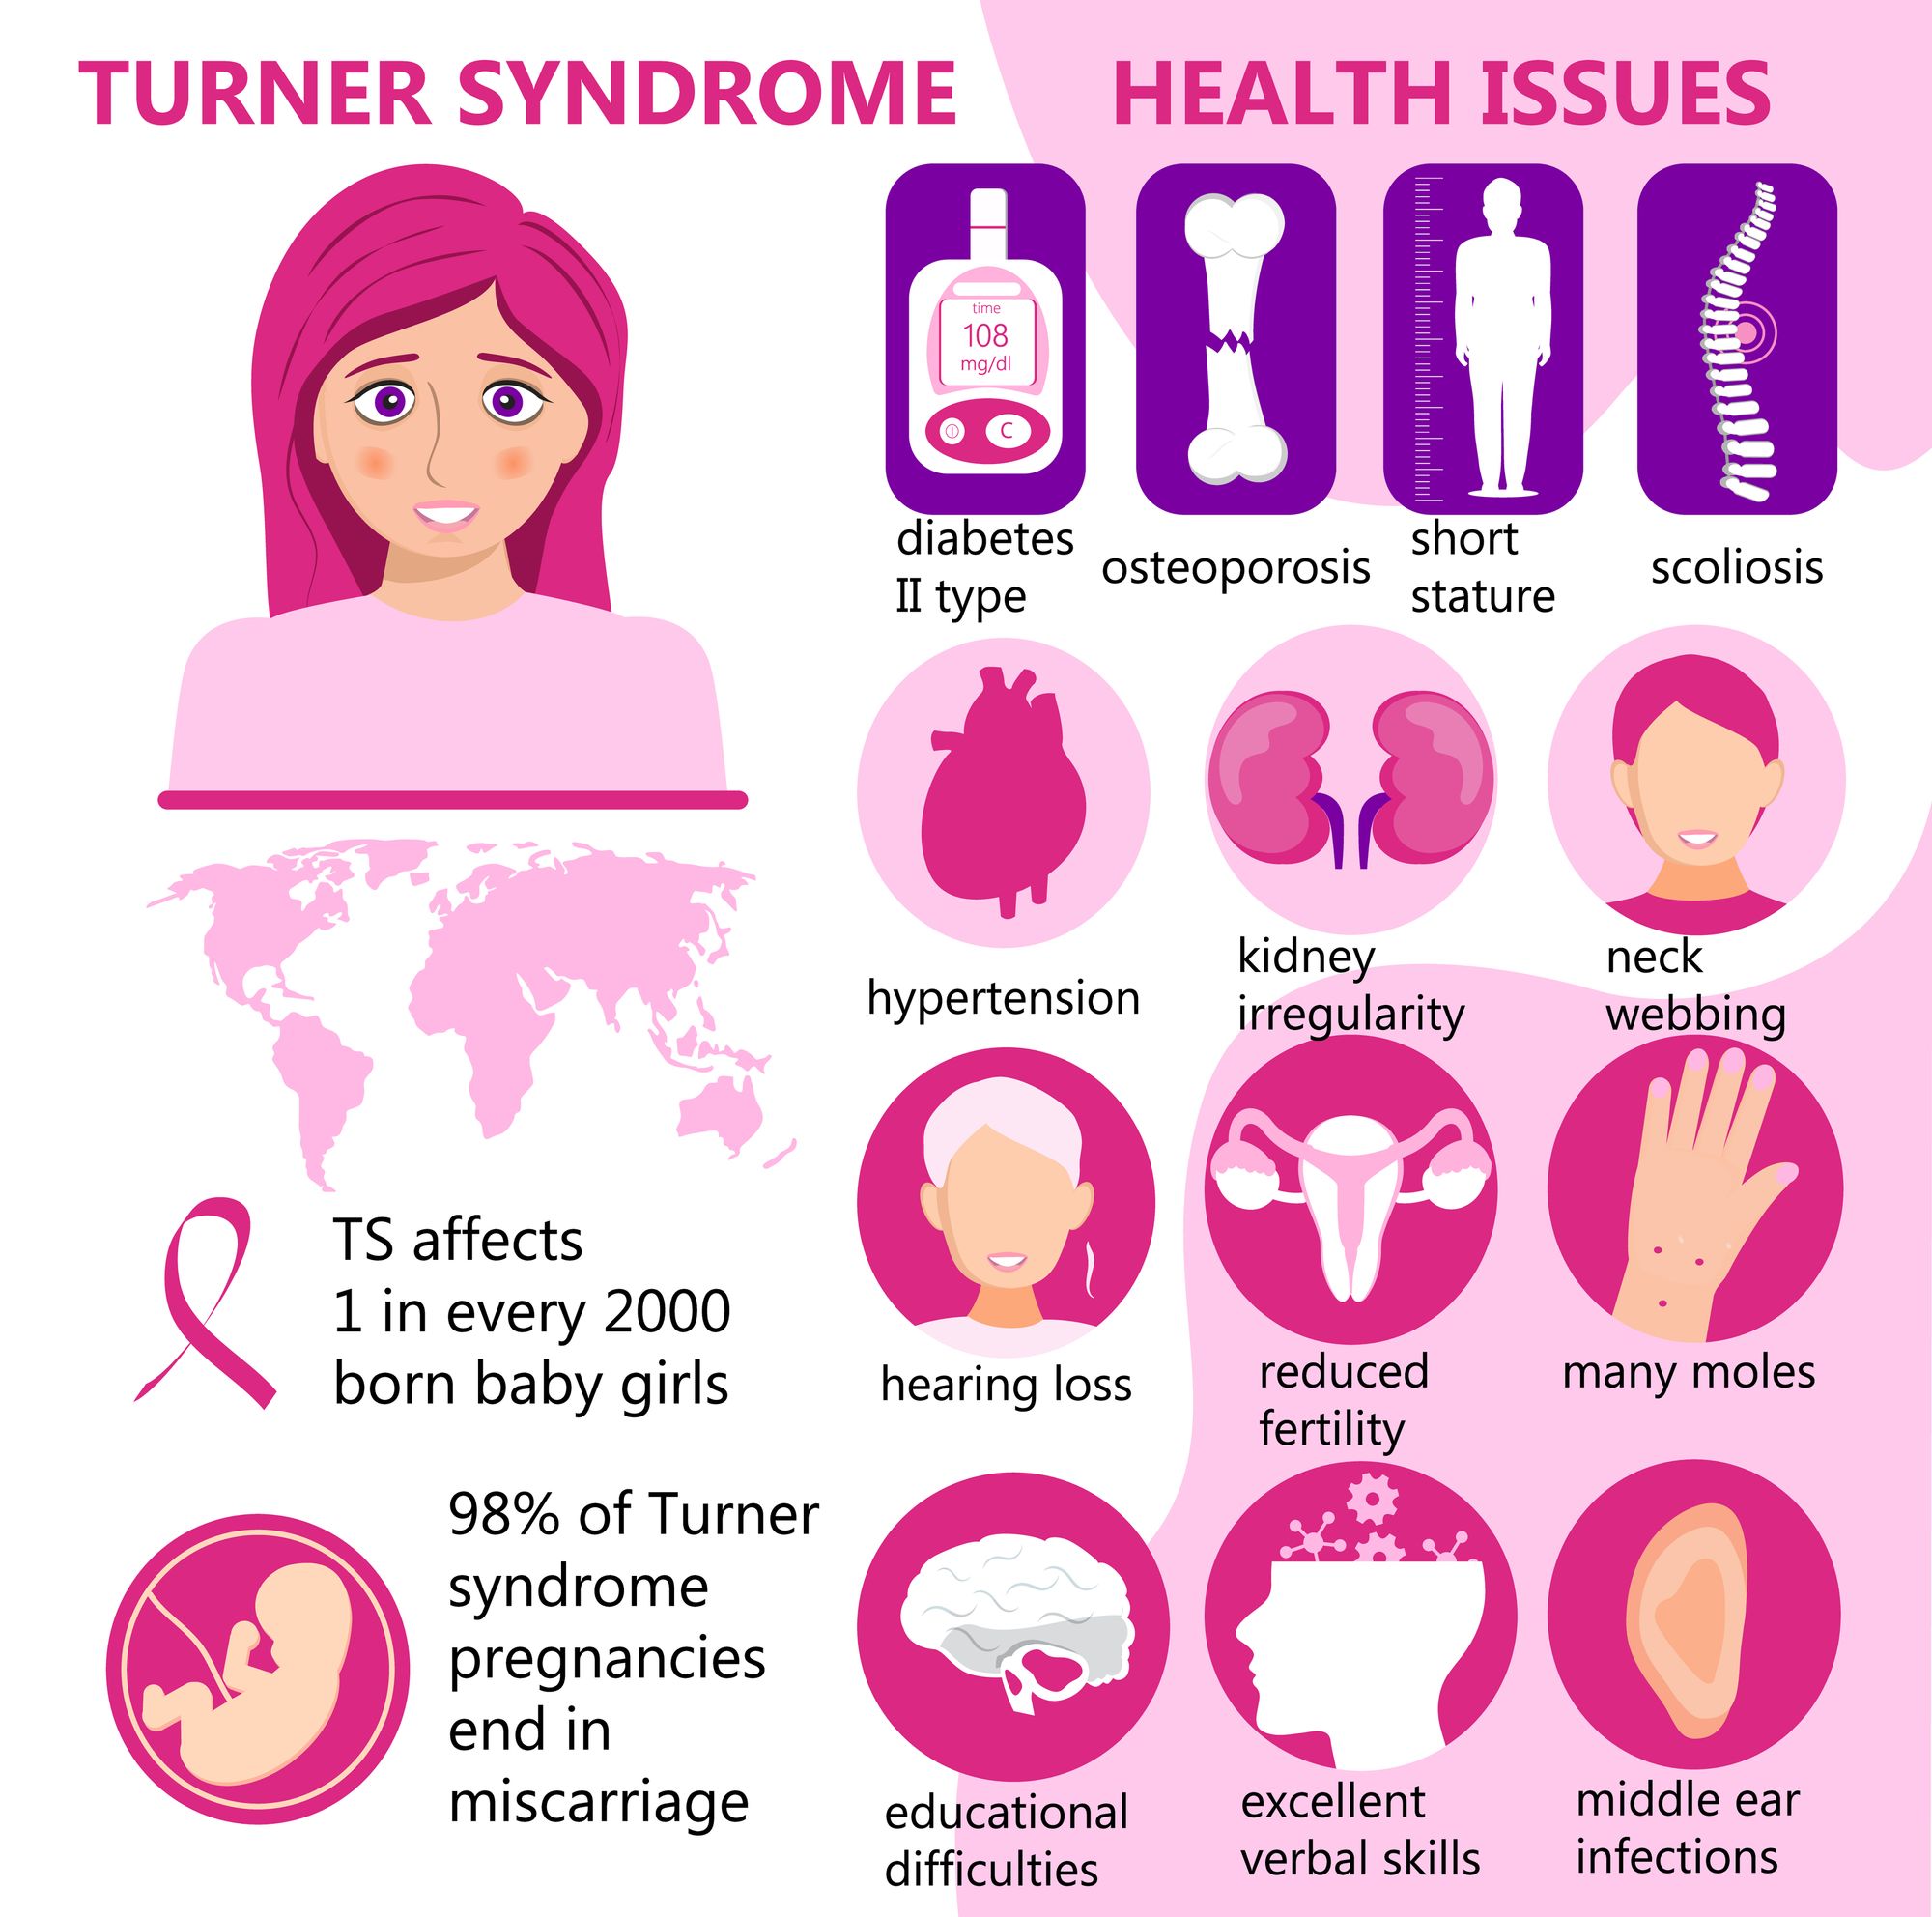 Turner Syndrome by 777 Bond vector | www.shutterstock.com